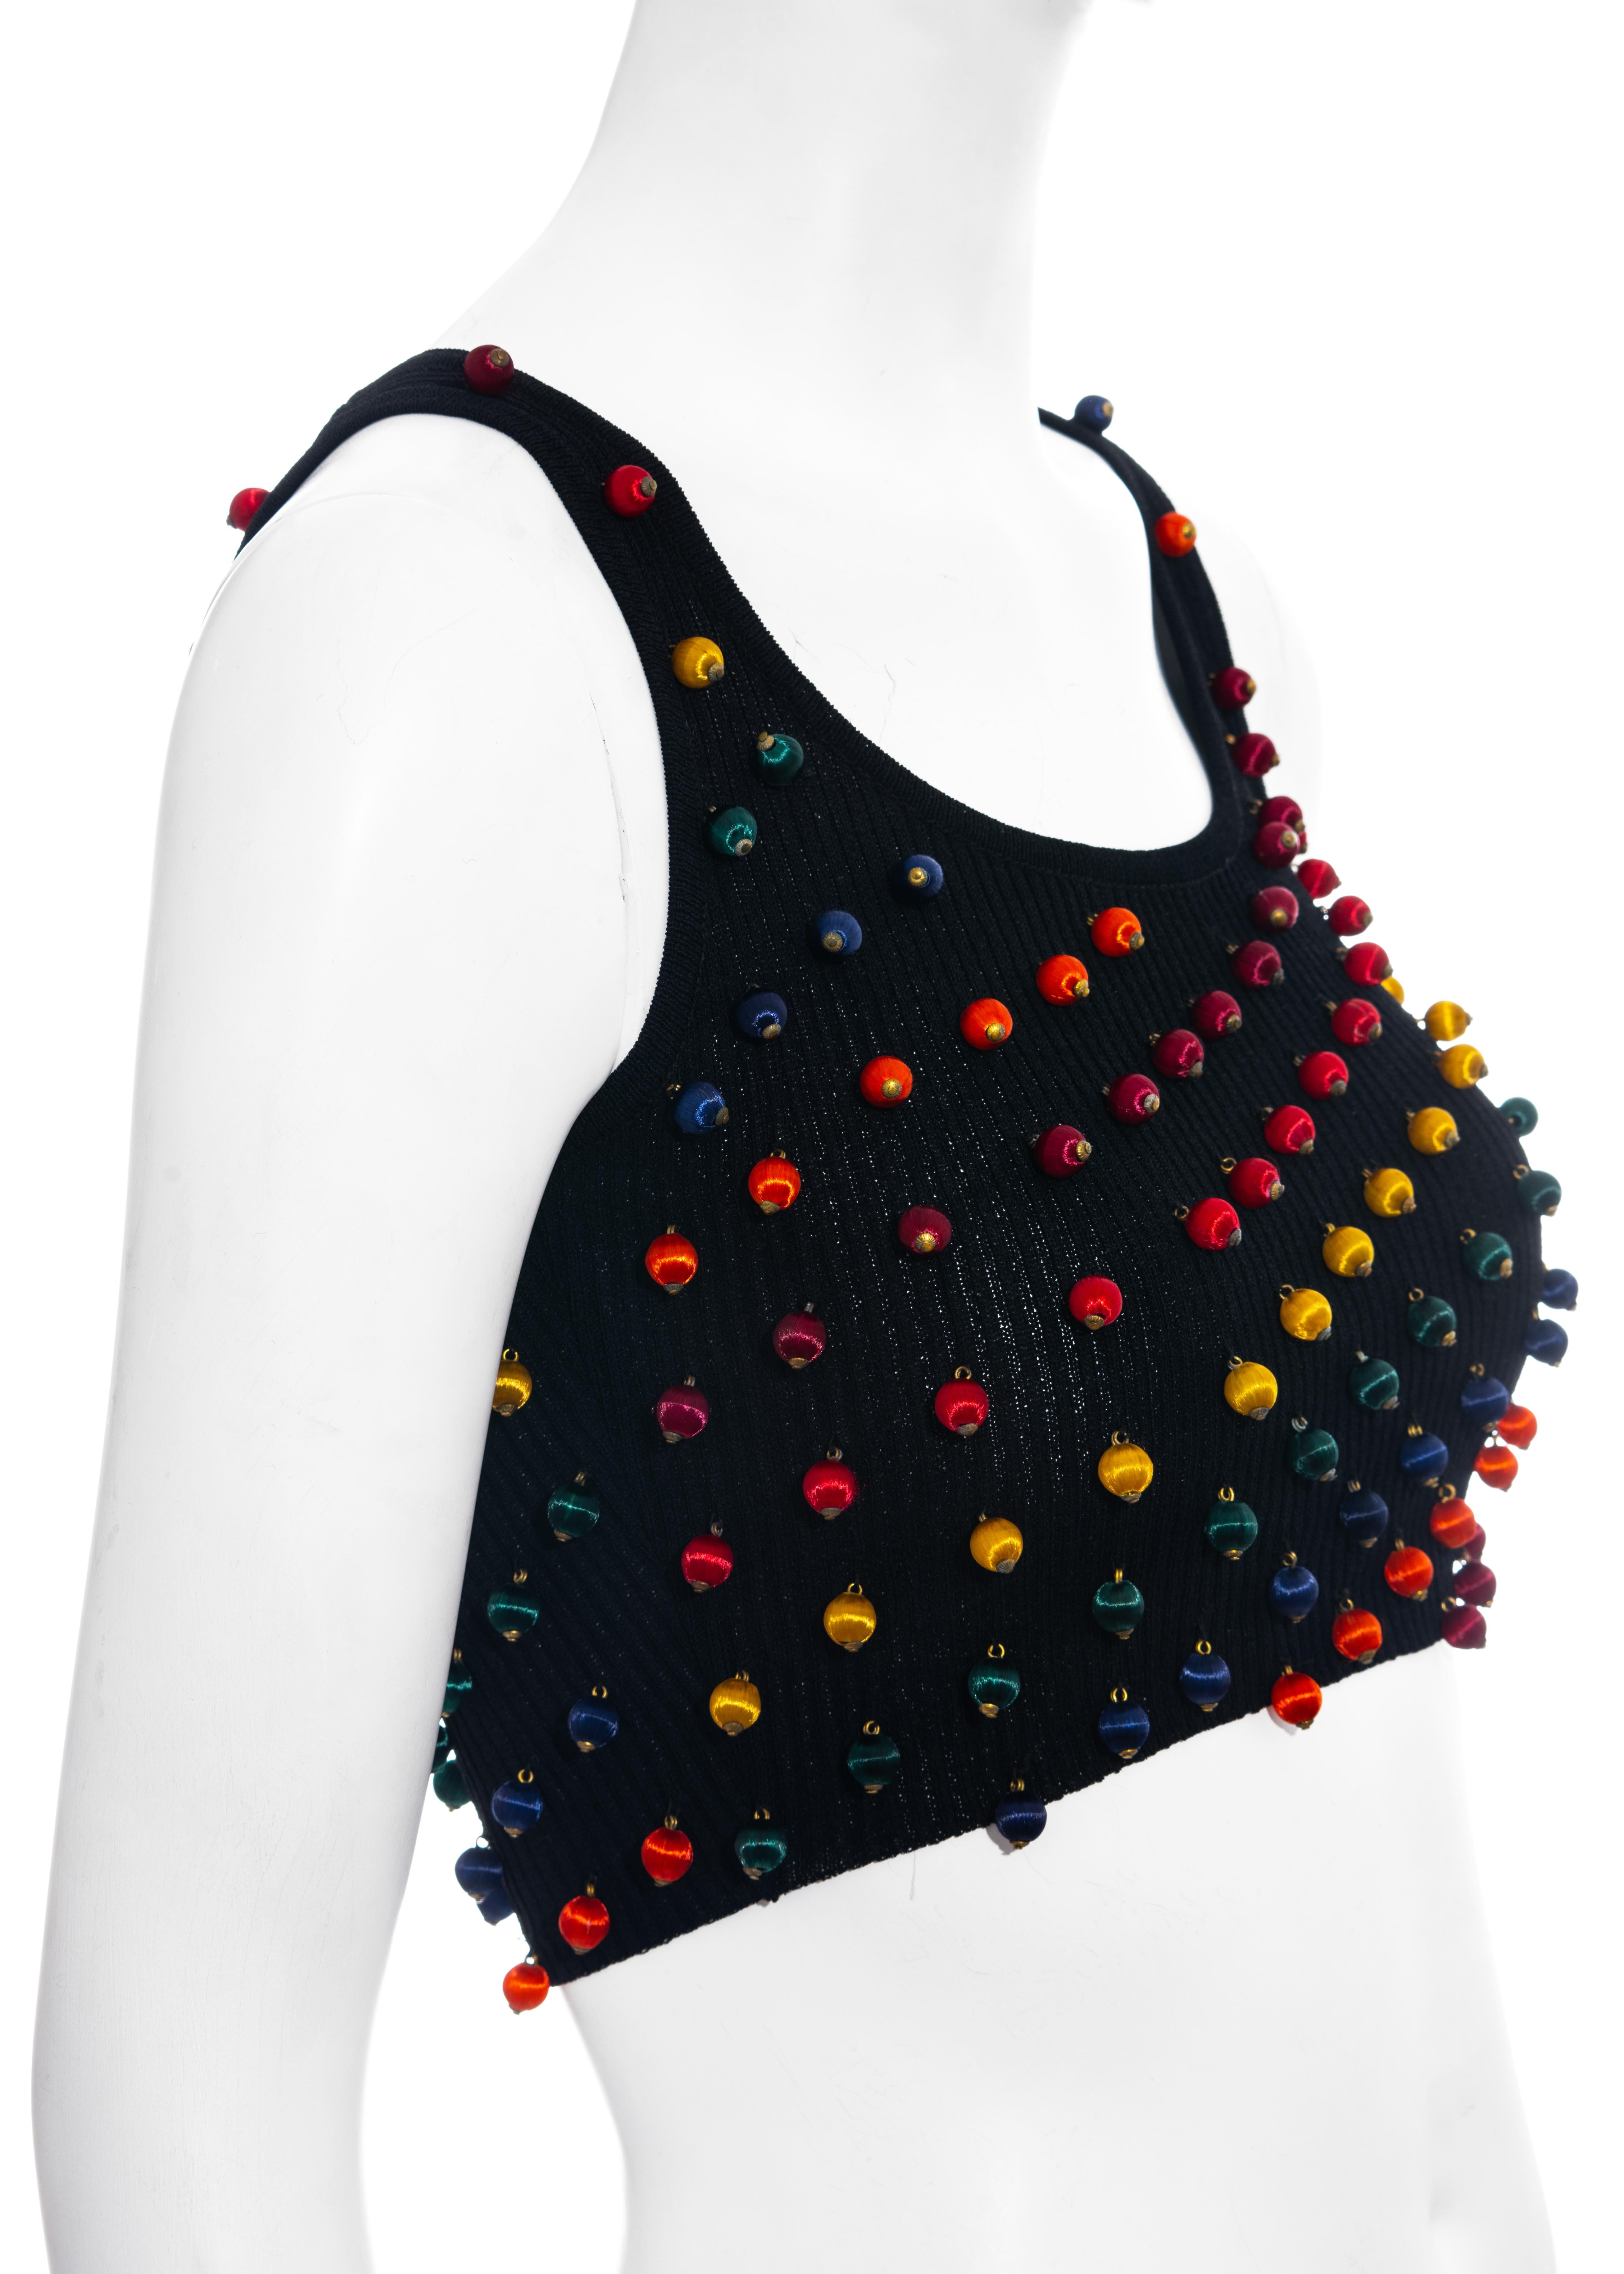 Dolce & Gabbana black viscose cropped vest with colourful silk beads, ss 1992 In Excellent Condition For Sale In London, GB